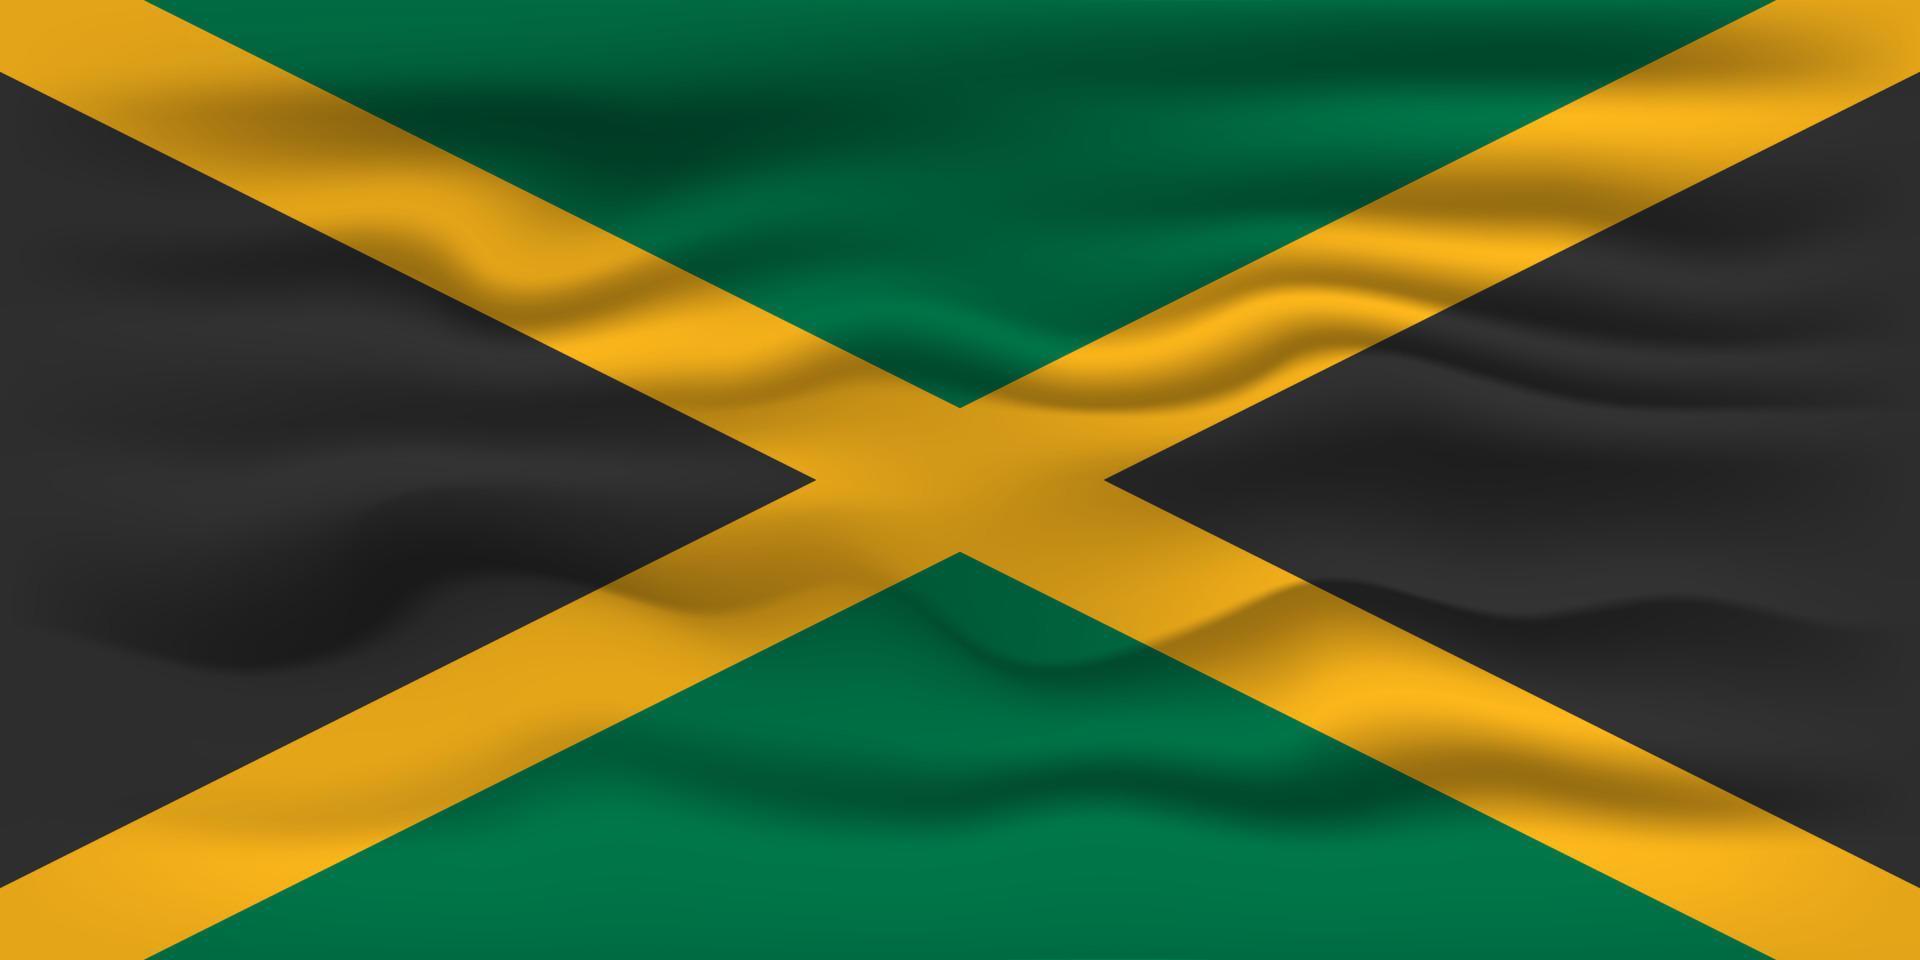 Waving flag of the country Jamaica. Vector illustration.